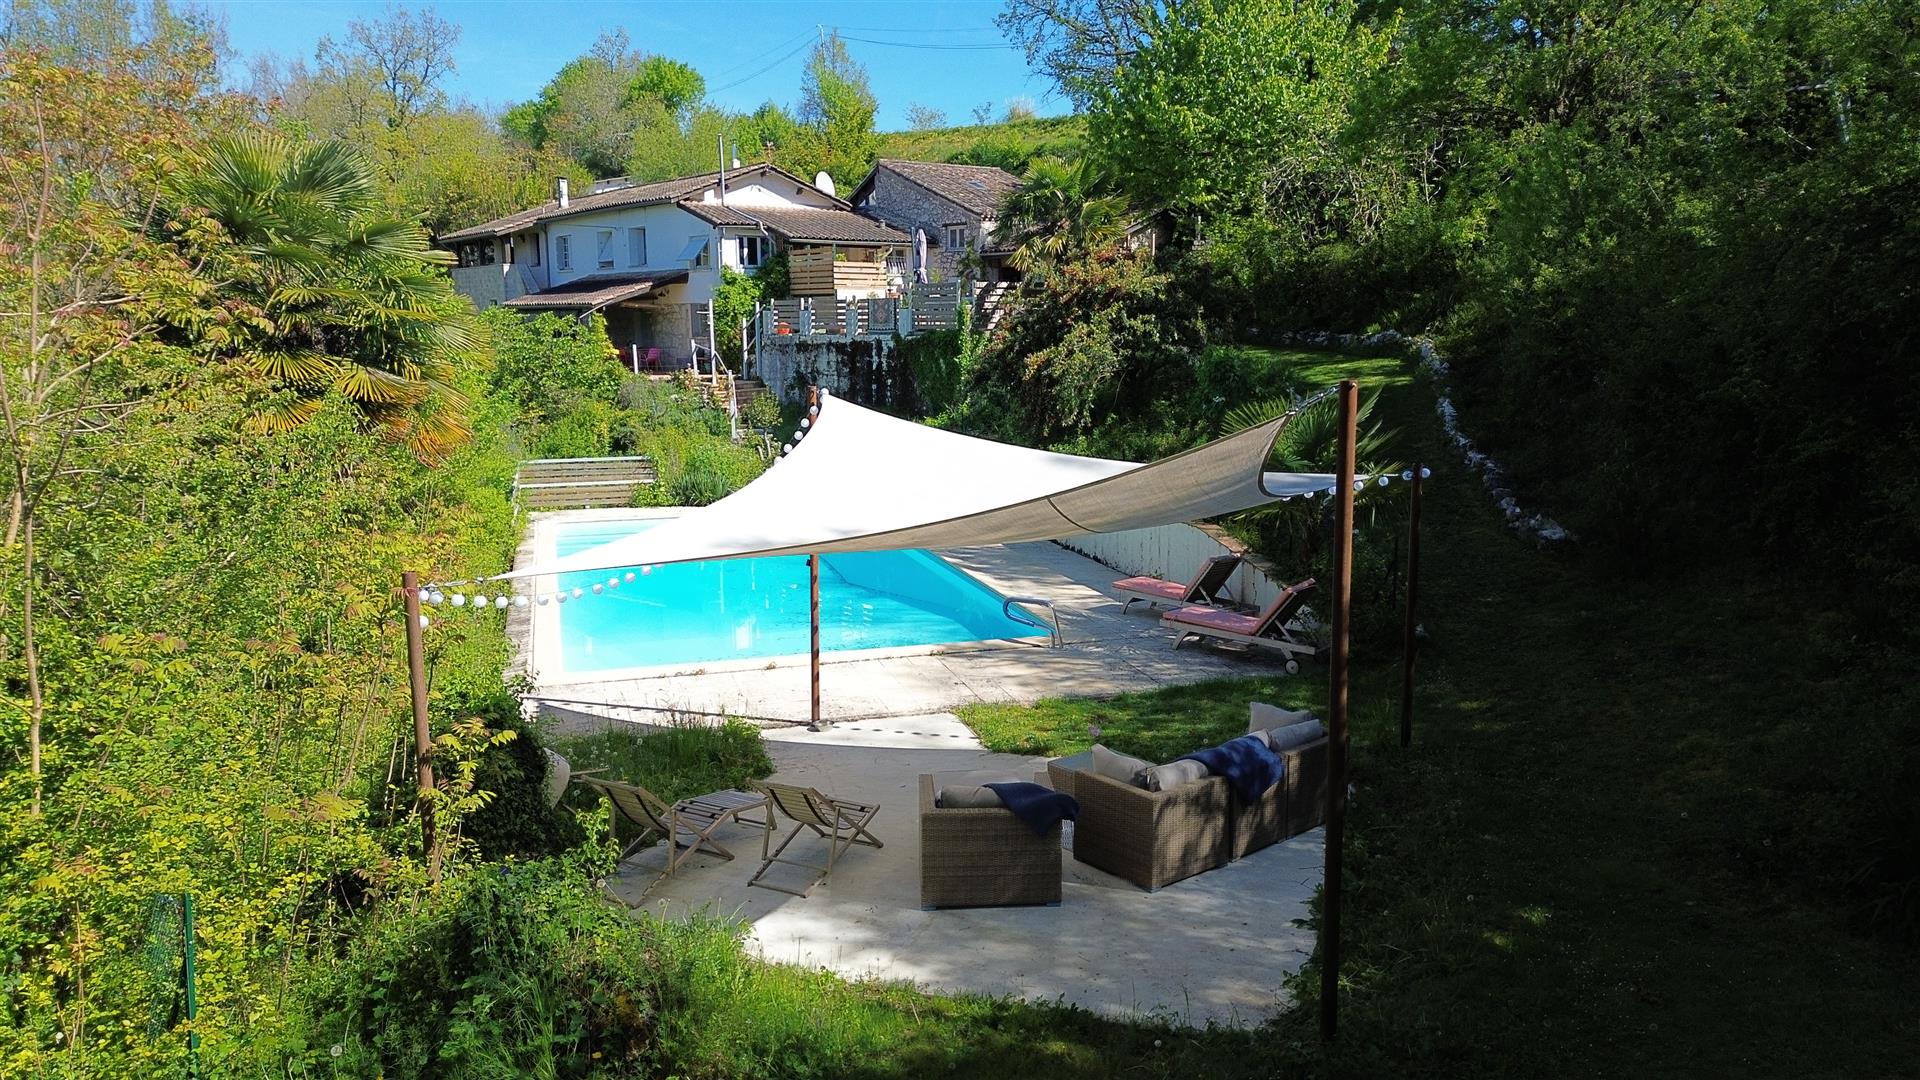  Tarn Et Garonne 3 bed  house with pool, 2+hectares incredible view